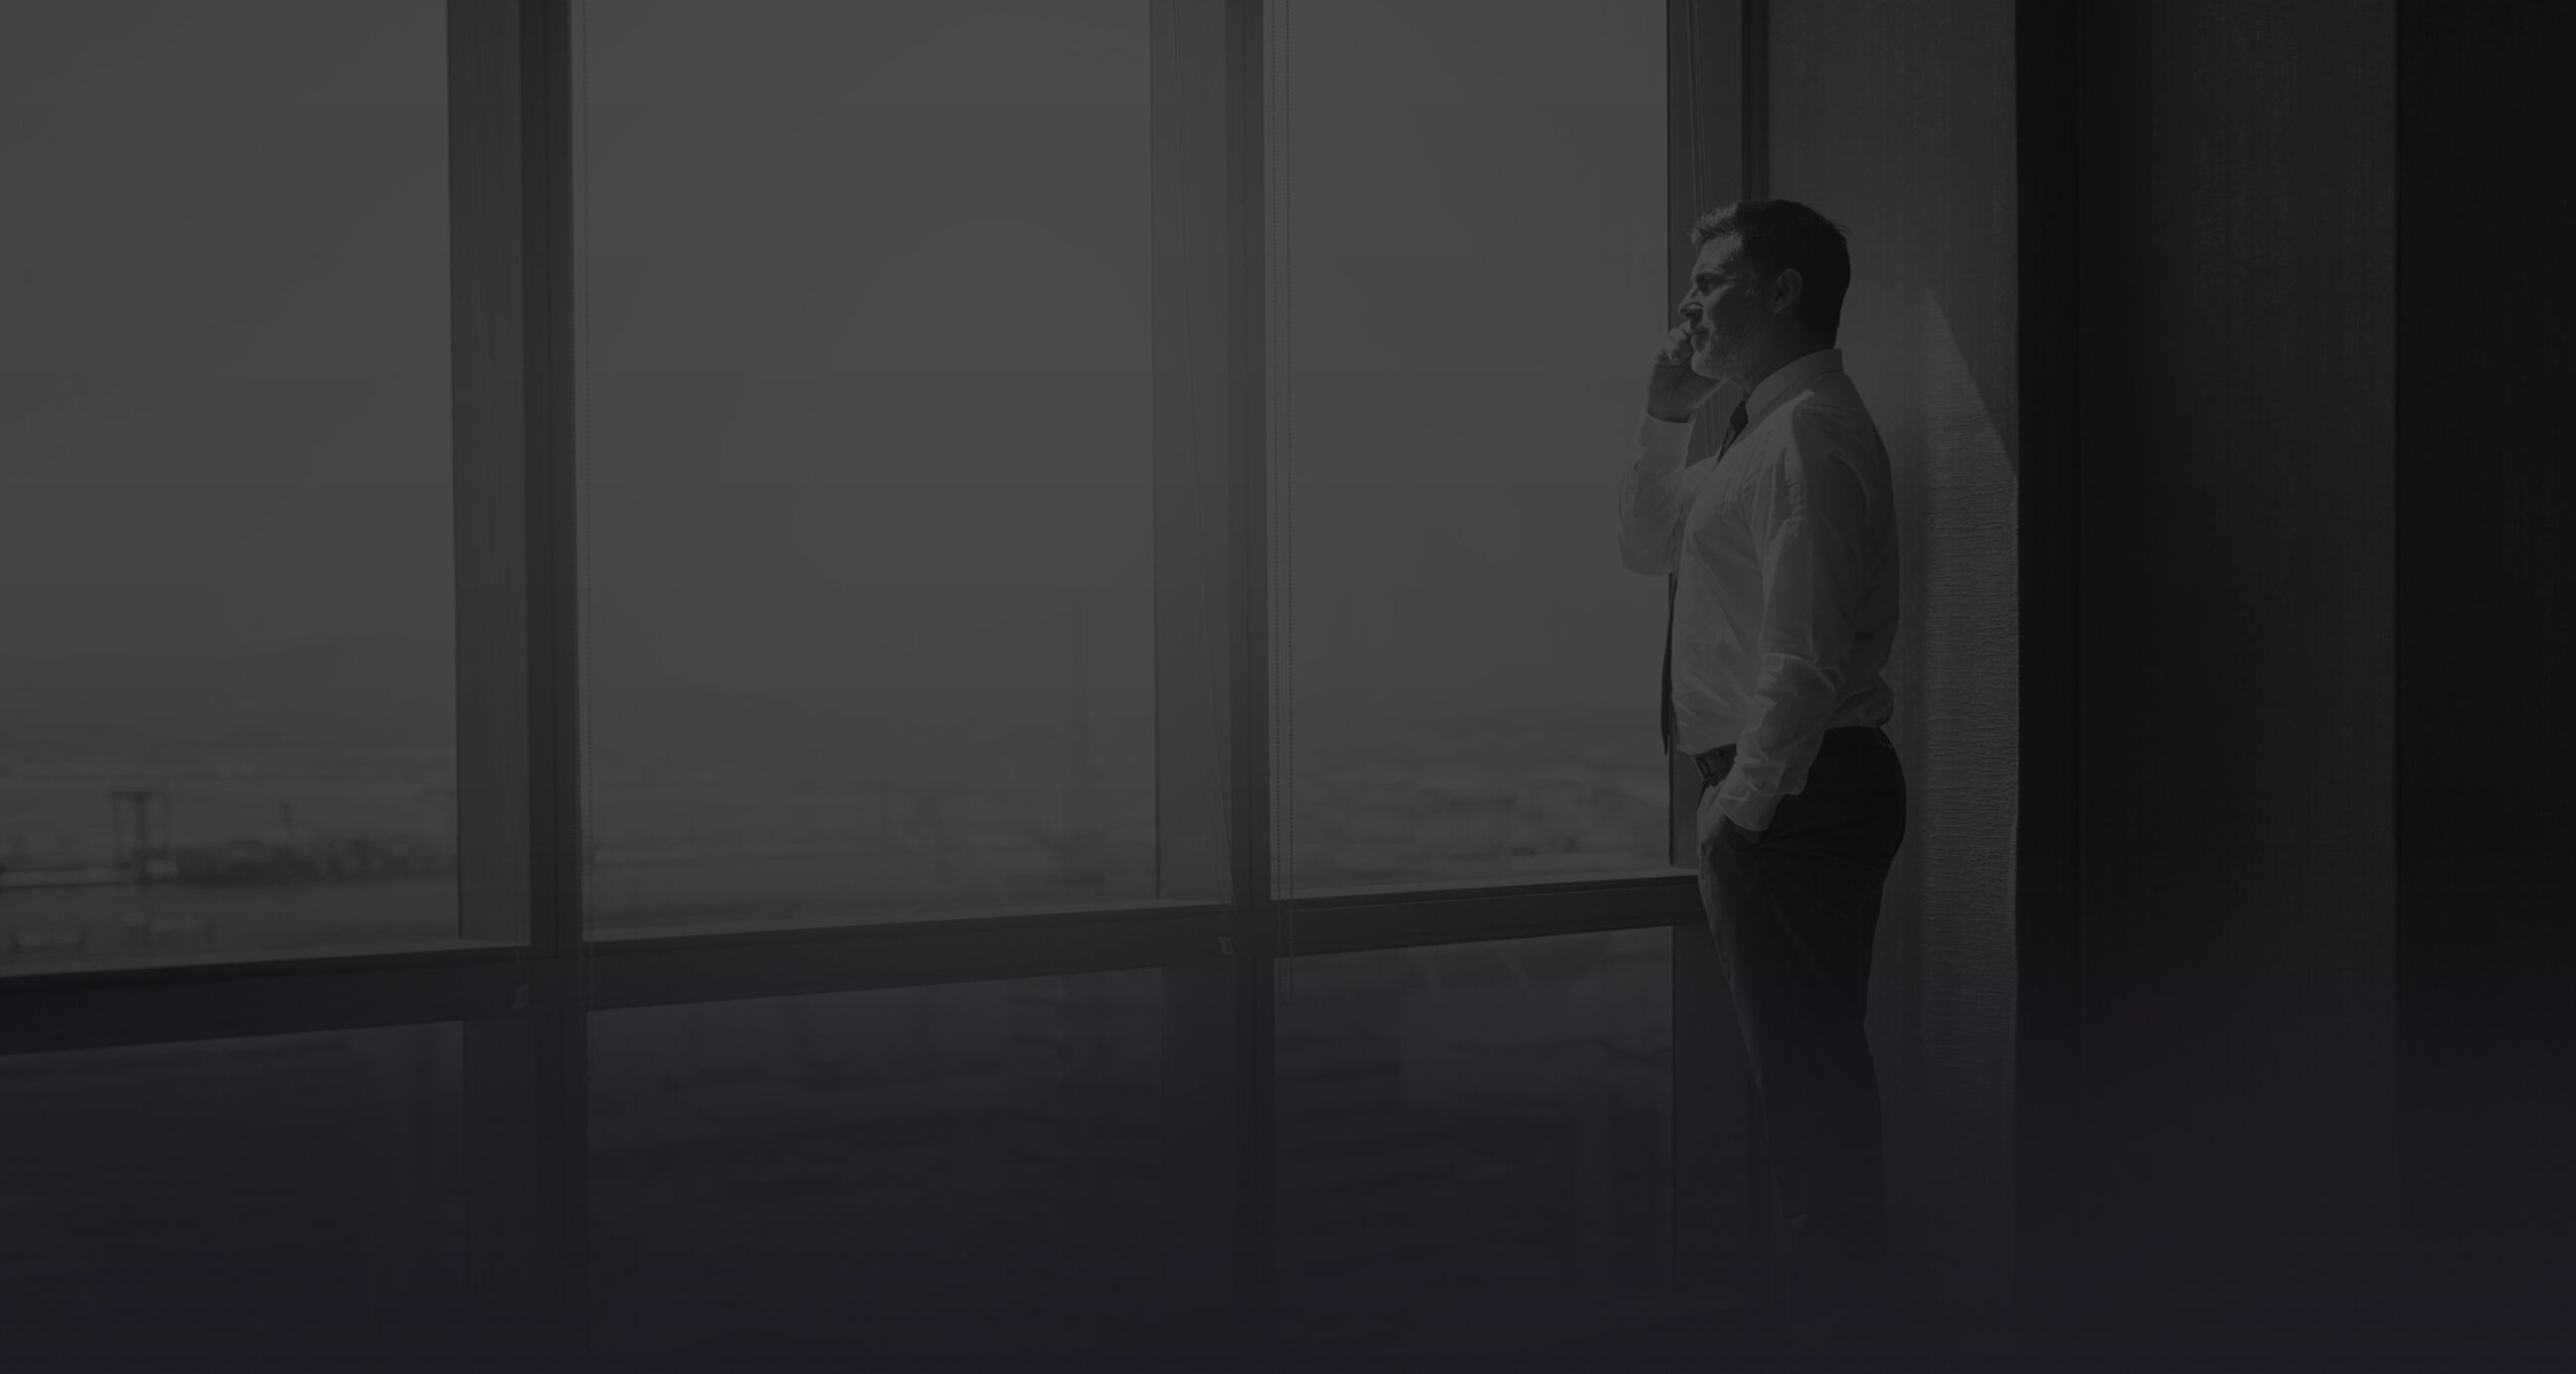 Confident businessman looking out of large windows at a view of the city below while talking on his mobile phone